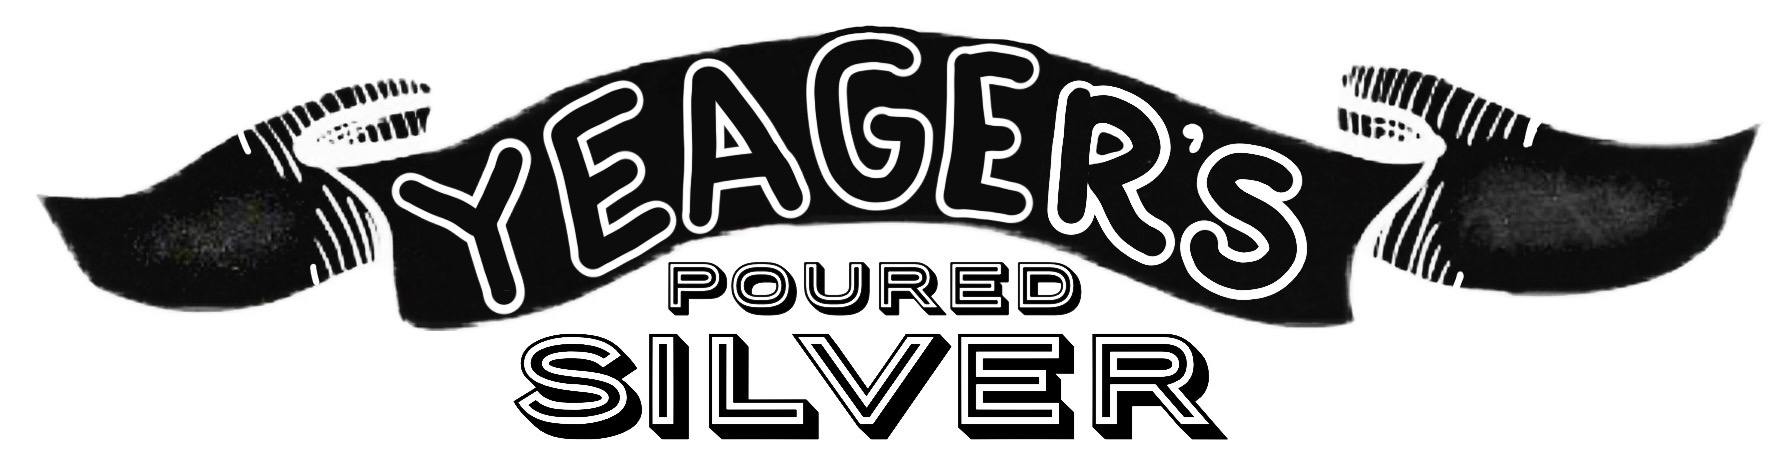 Yeager's Poured Silver | 330-299-5239